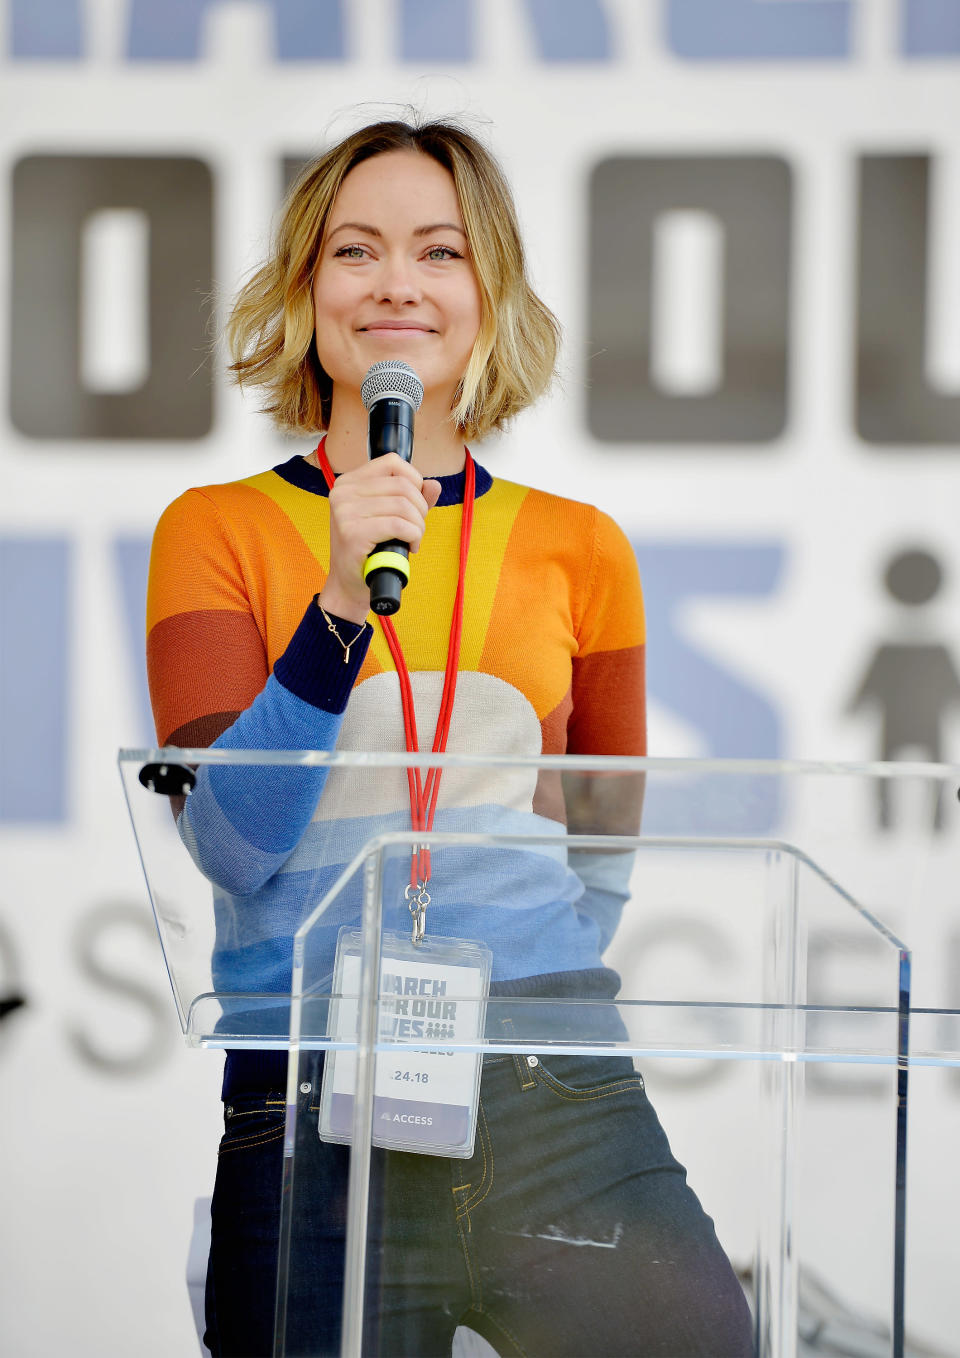 Olivia Wilde addresses the crowd at March for Our Lives Los Angeles, March 24, 2018. (Photo: Getty Images)